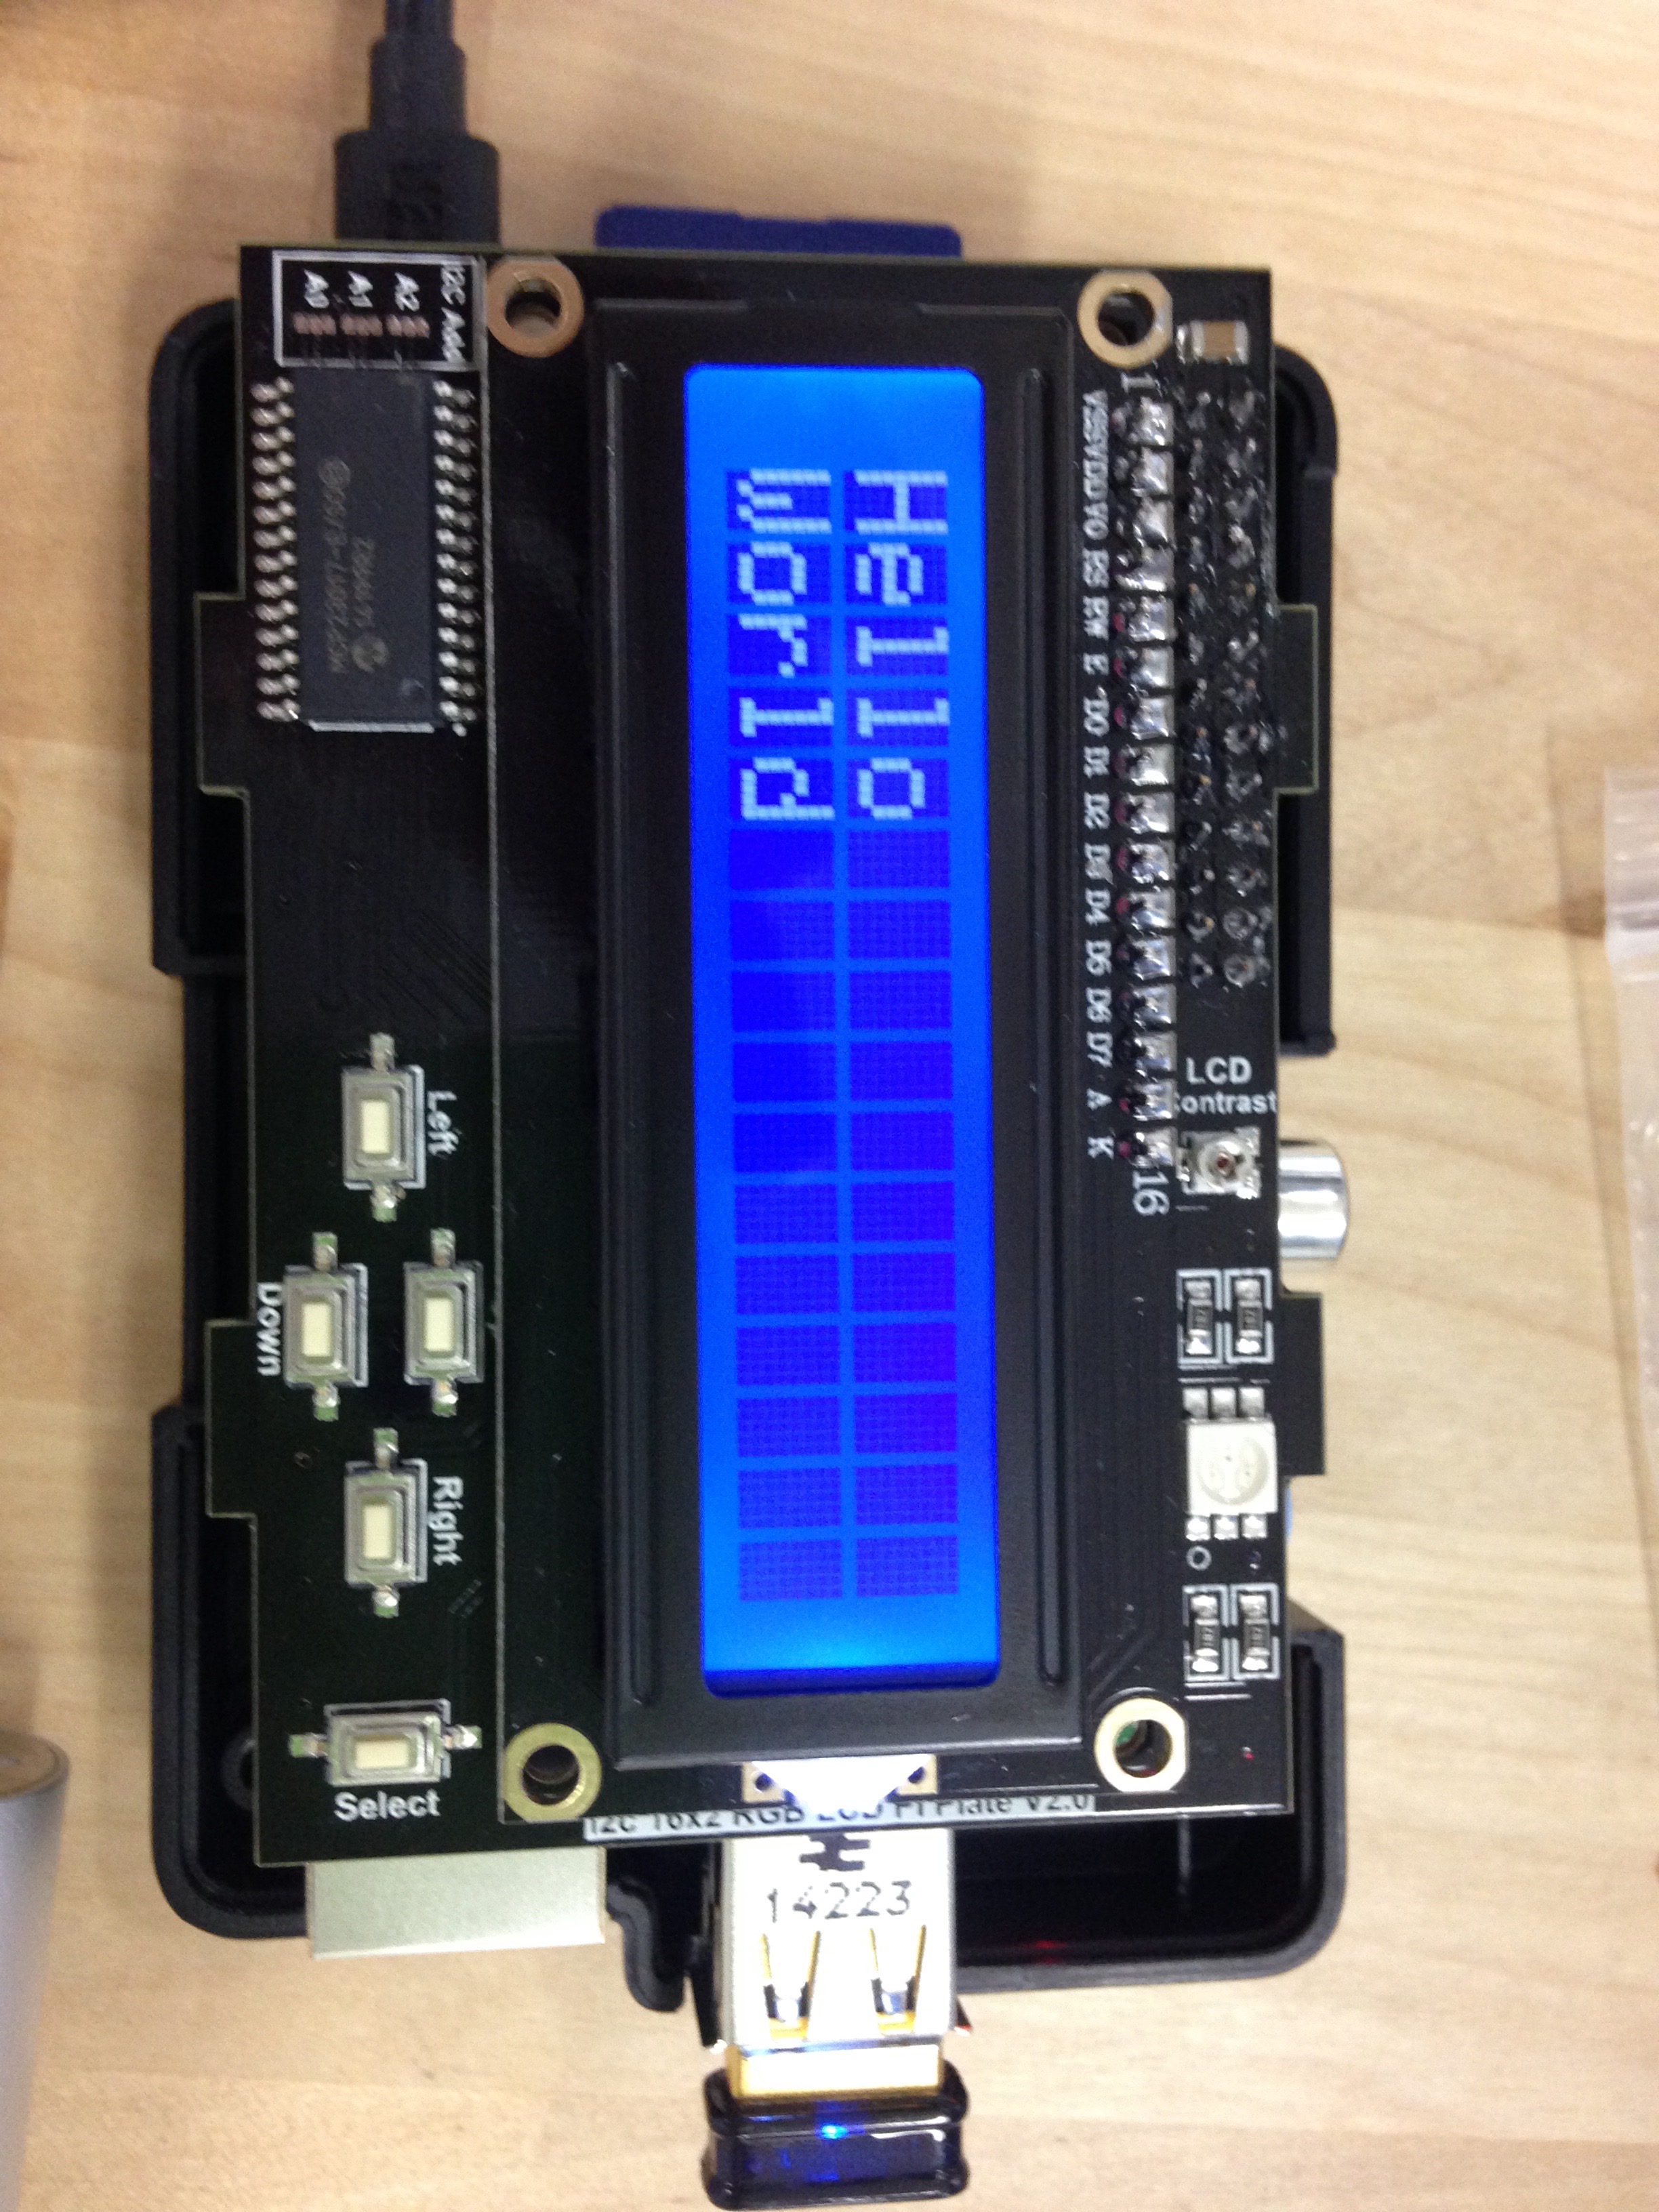 A Hello World message on an LCD display